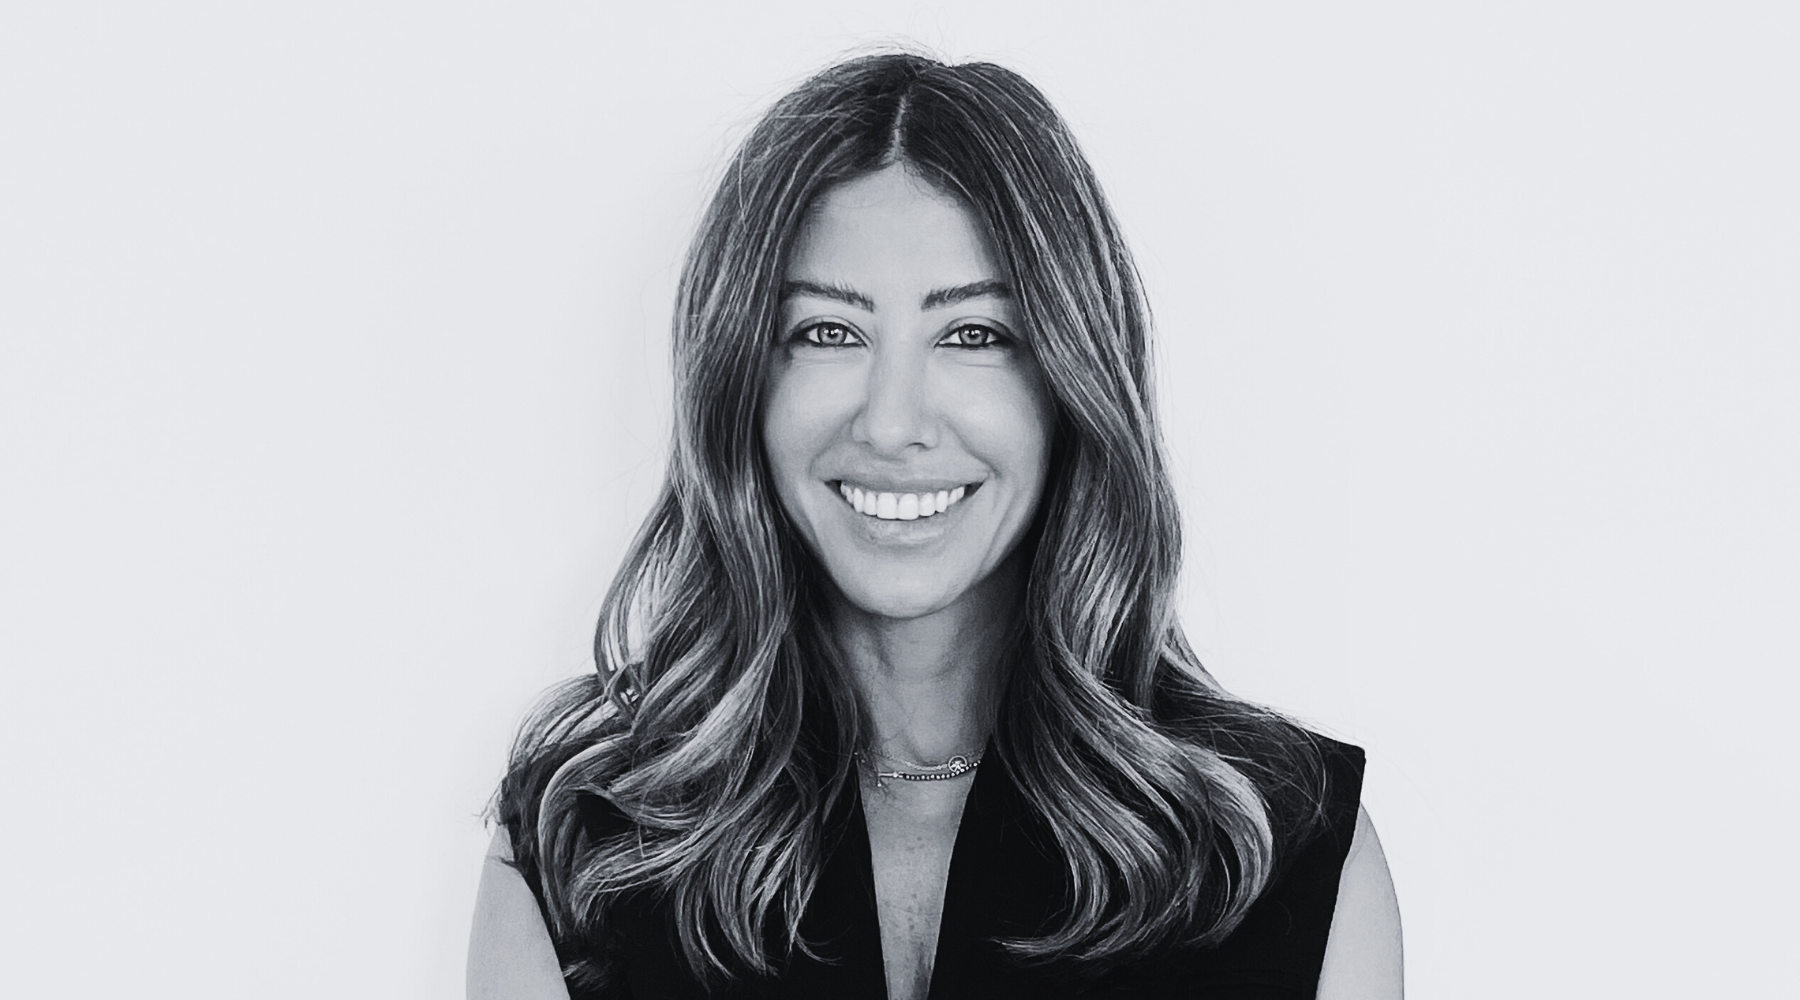 GroupM MENA Appoints Pauline Rady as Regional Managing Director and Client Lead